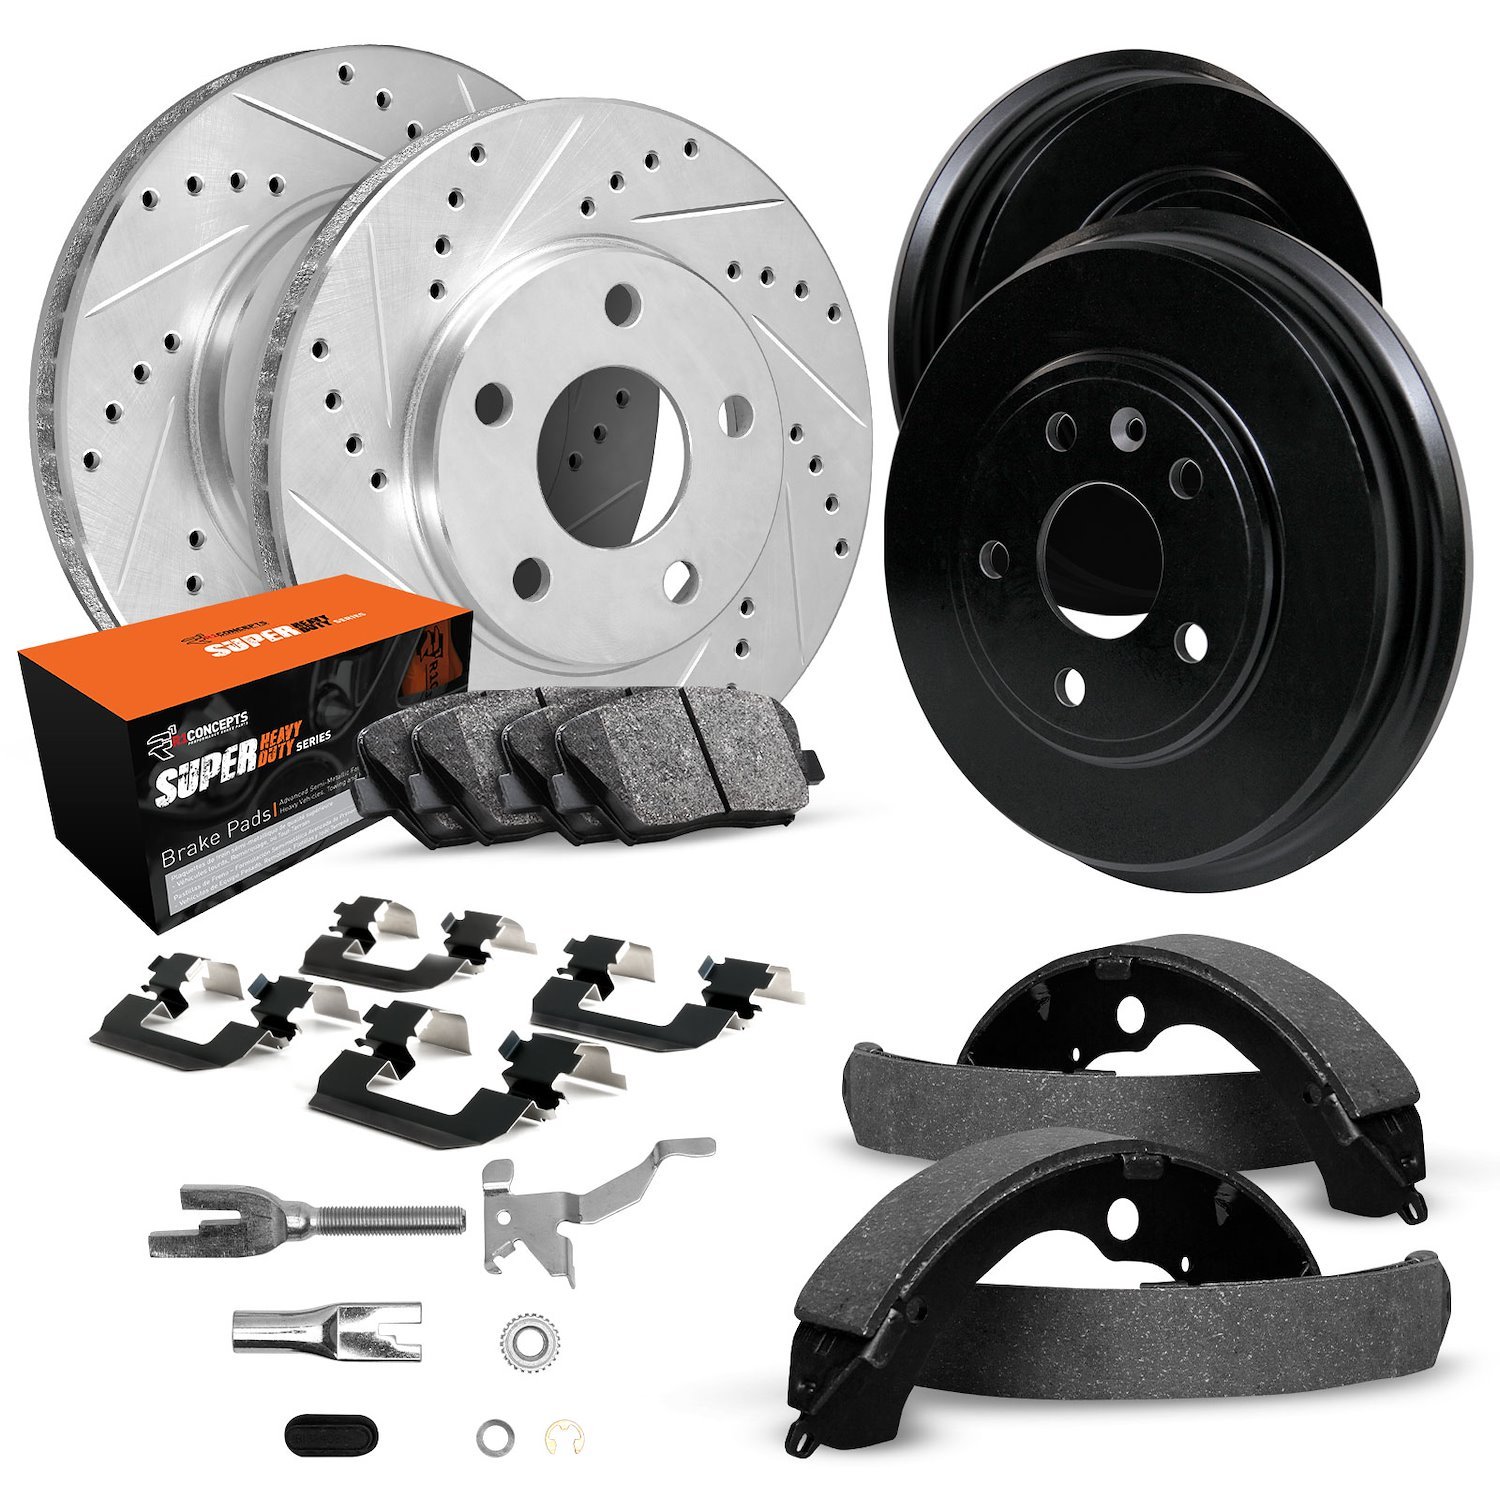 E-Line Drilled/Slotted Silver Rotor & Drum Set w/Super-Duty Pads, Shoes/Hardware/Adjusters, 1974-1974 Ford/Lincoln/Mercury/Mazda